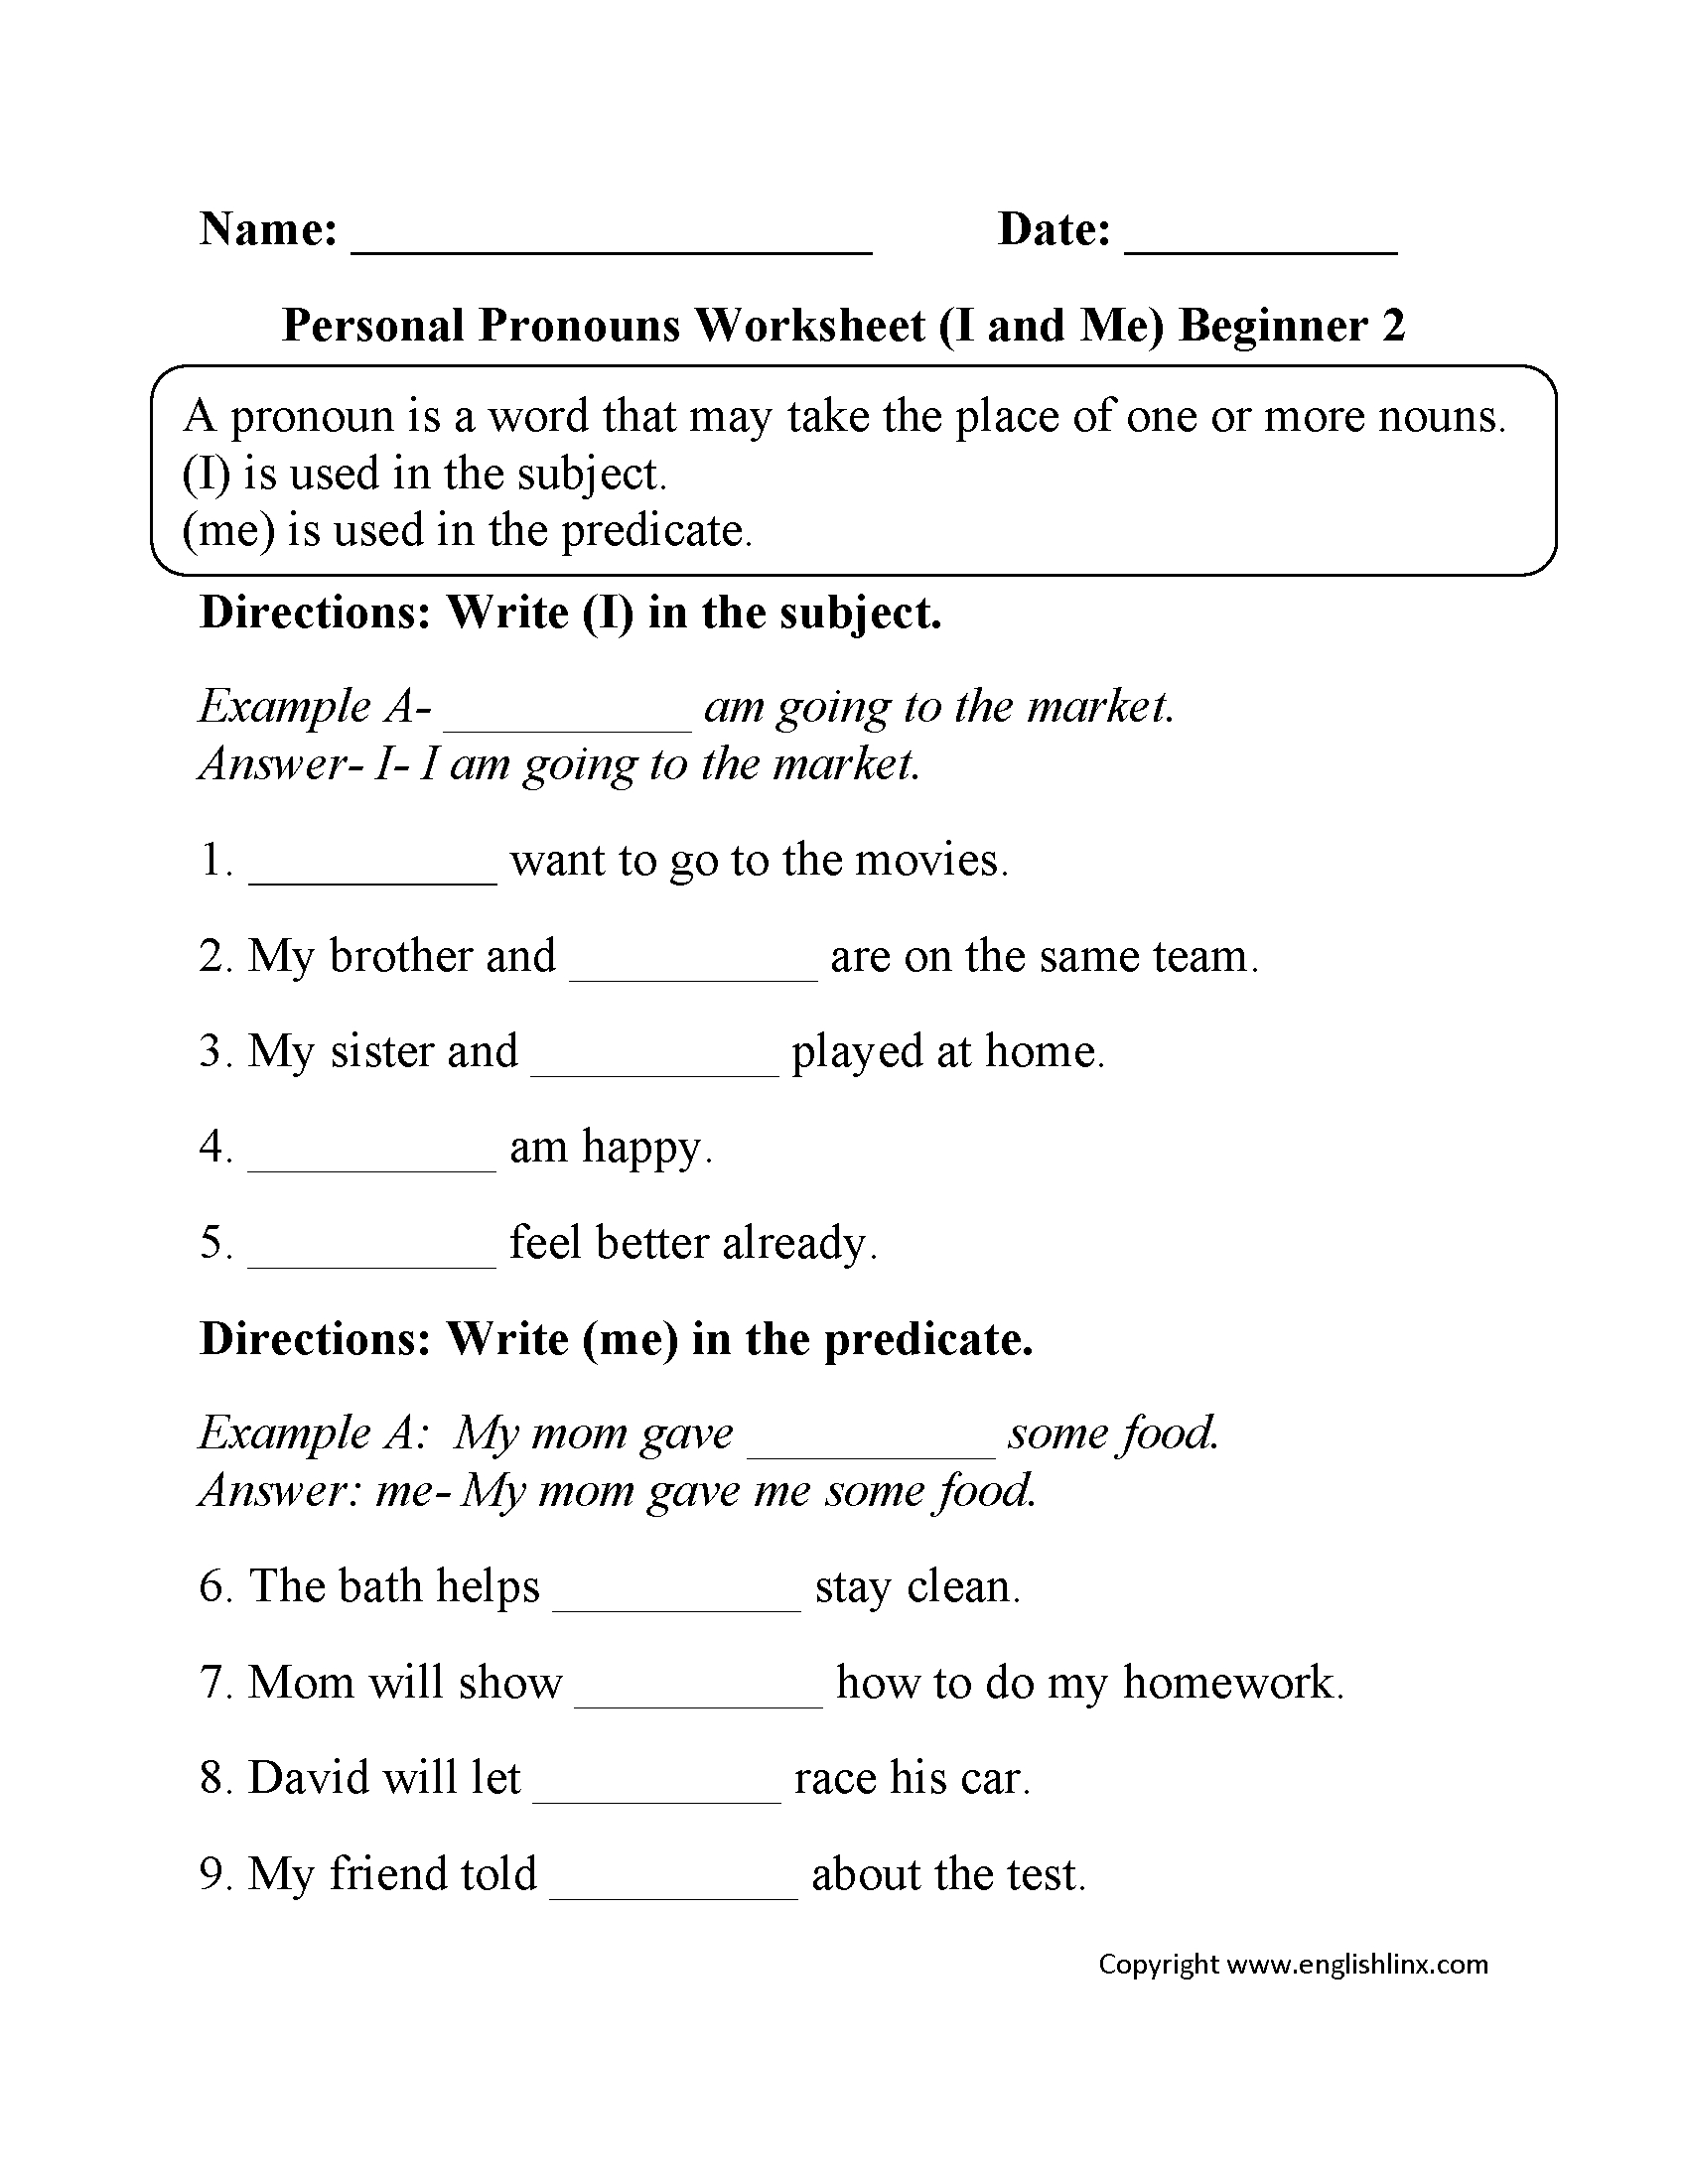 Pronouns Worksheets  Personal Pronouns Worksheets As Well As Spanish Level 1 Worksheets